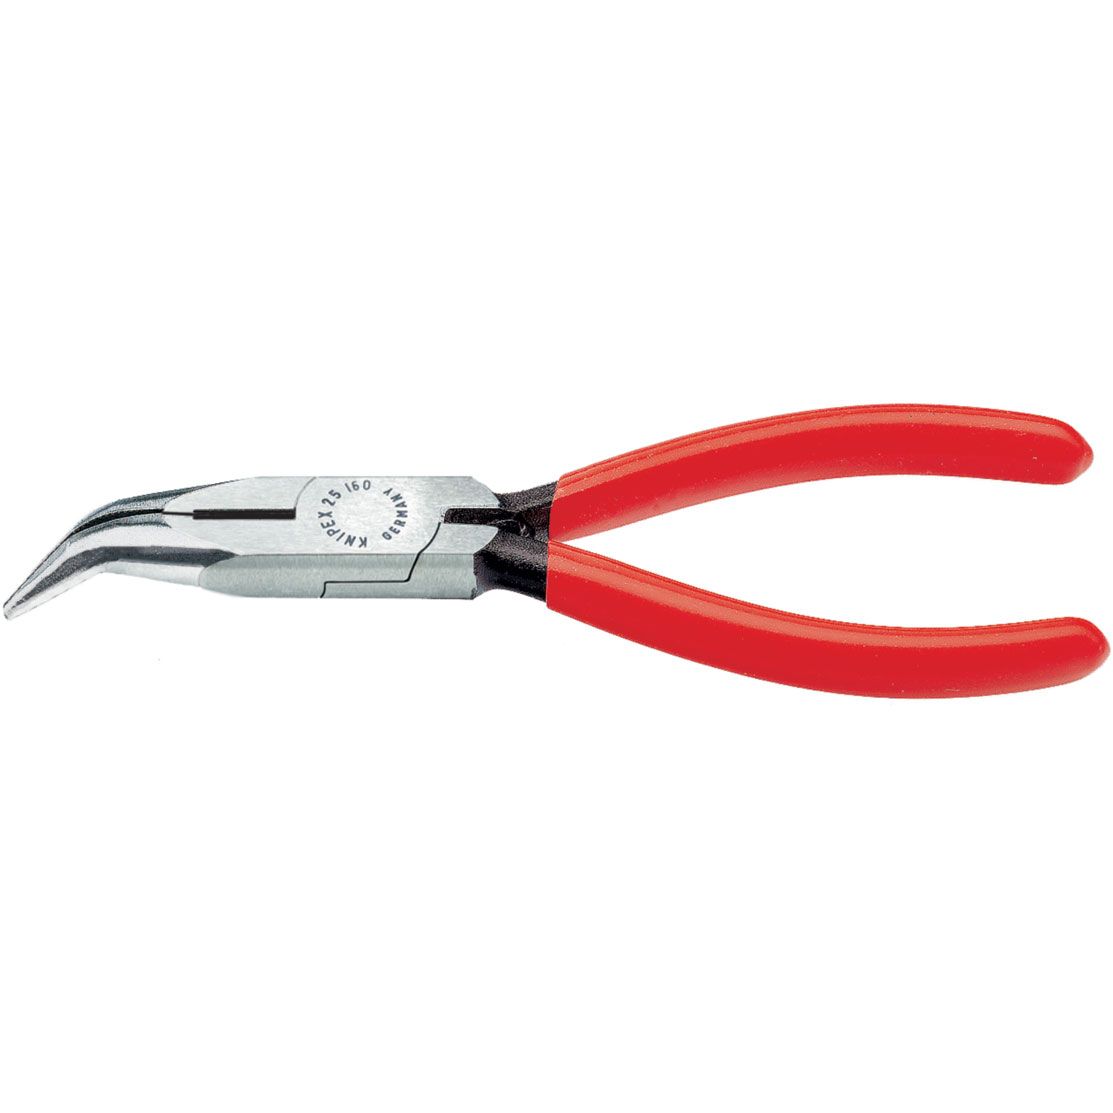 Knipex Angled Long Nose Pliers